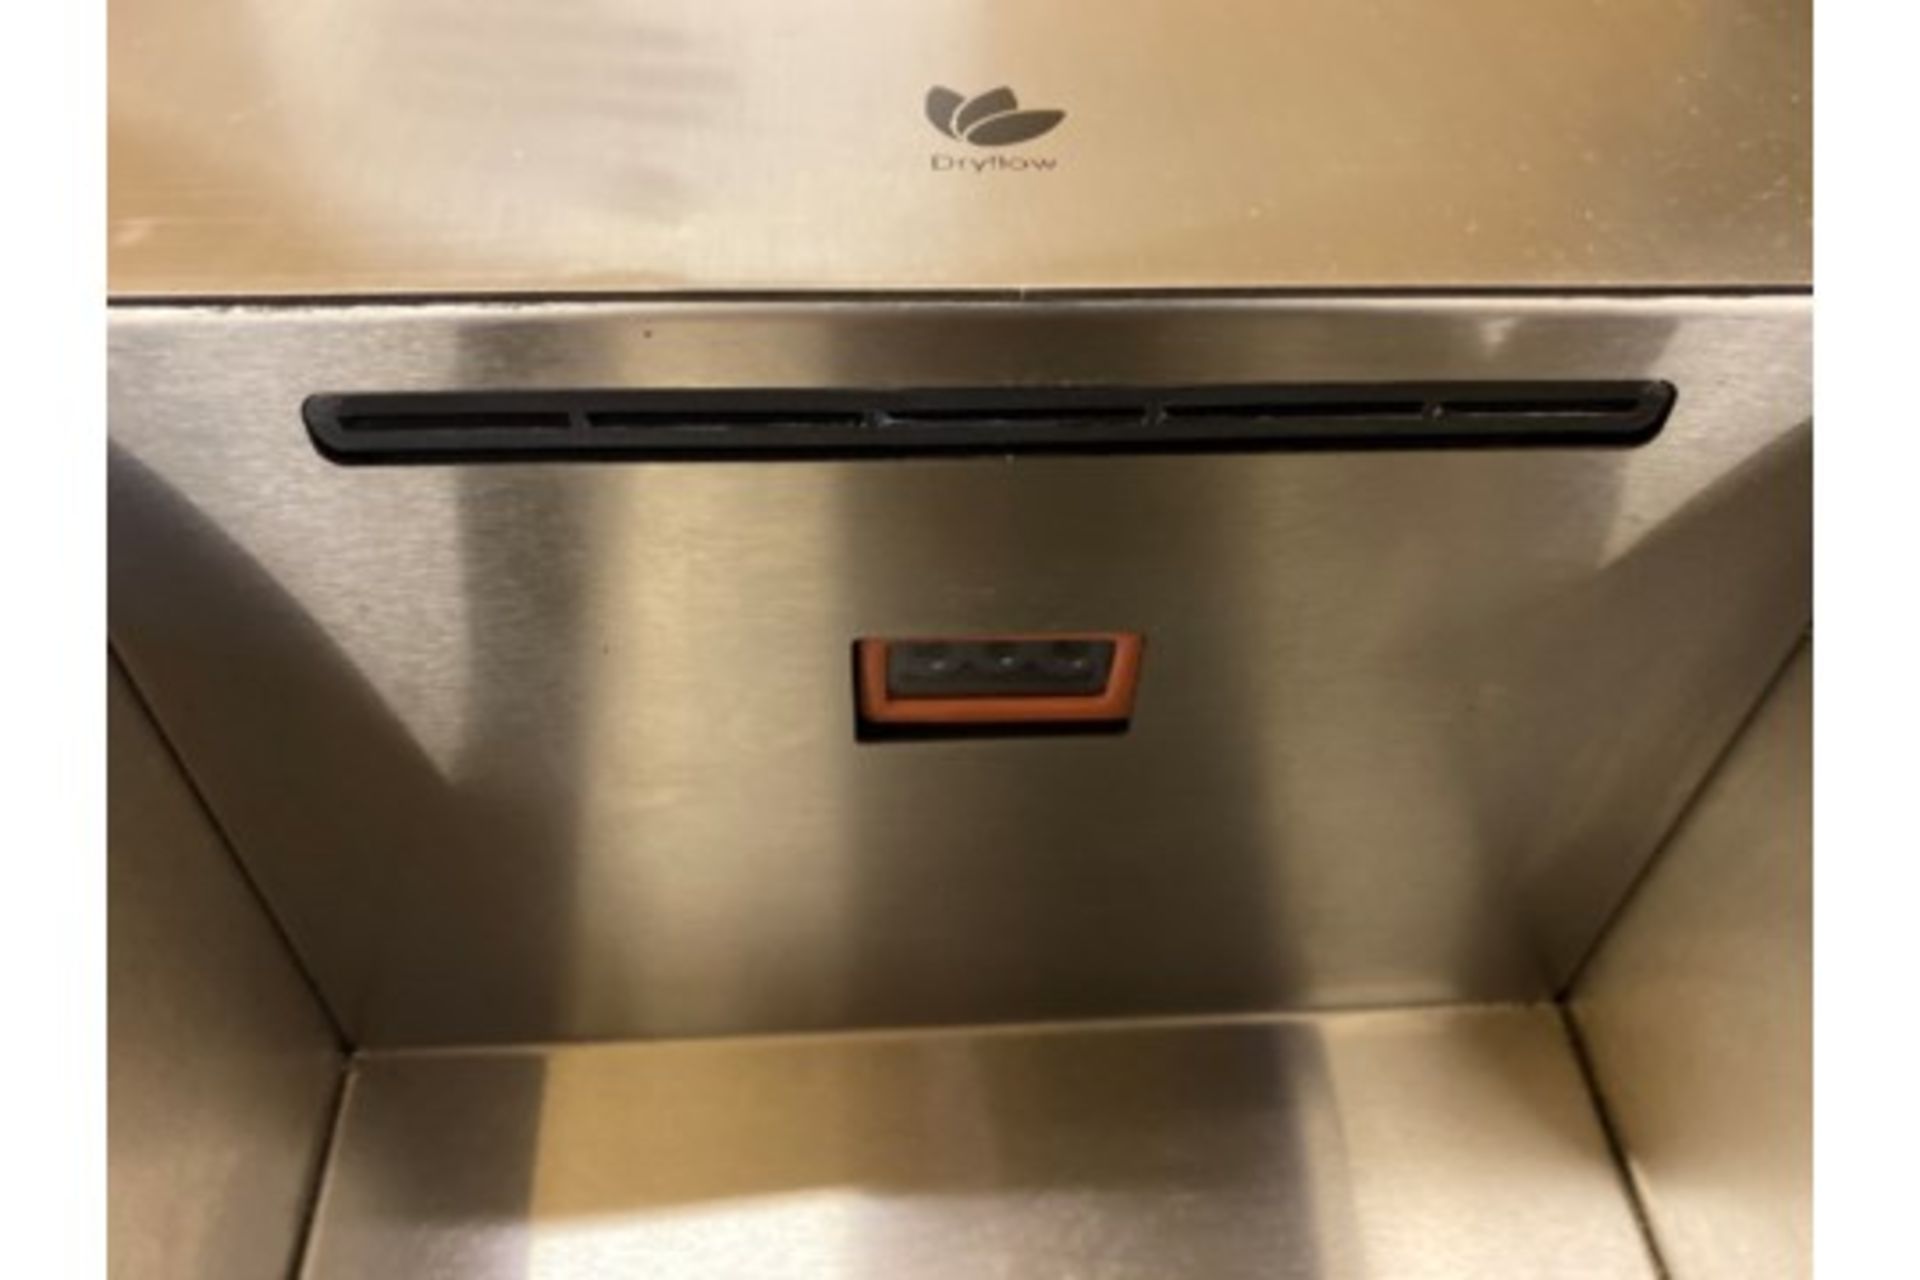 Boxed Dryflow Recessed MK11 Electric Hand Dryer - Image 4 of 5